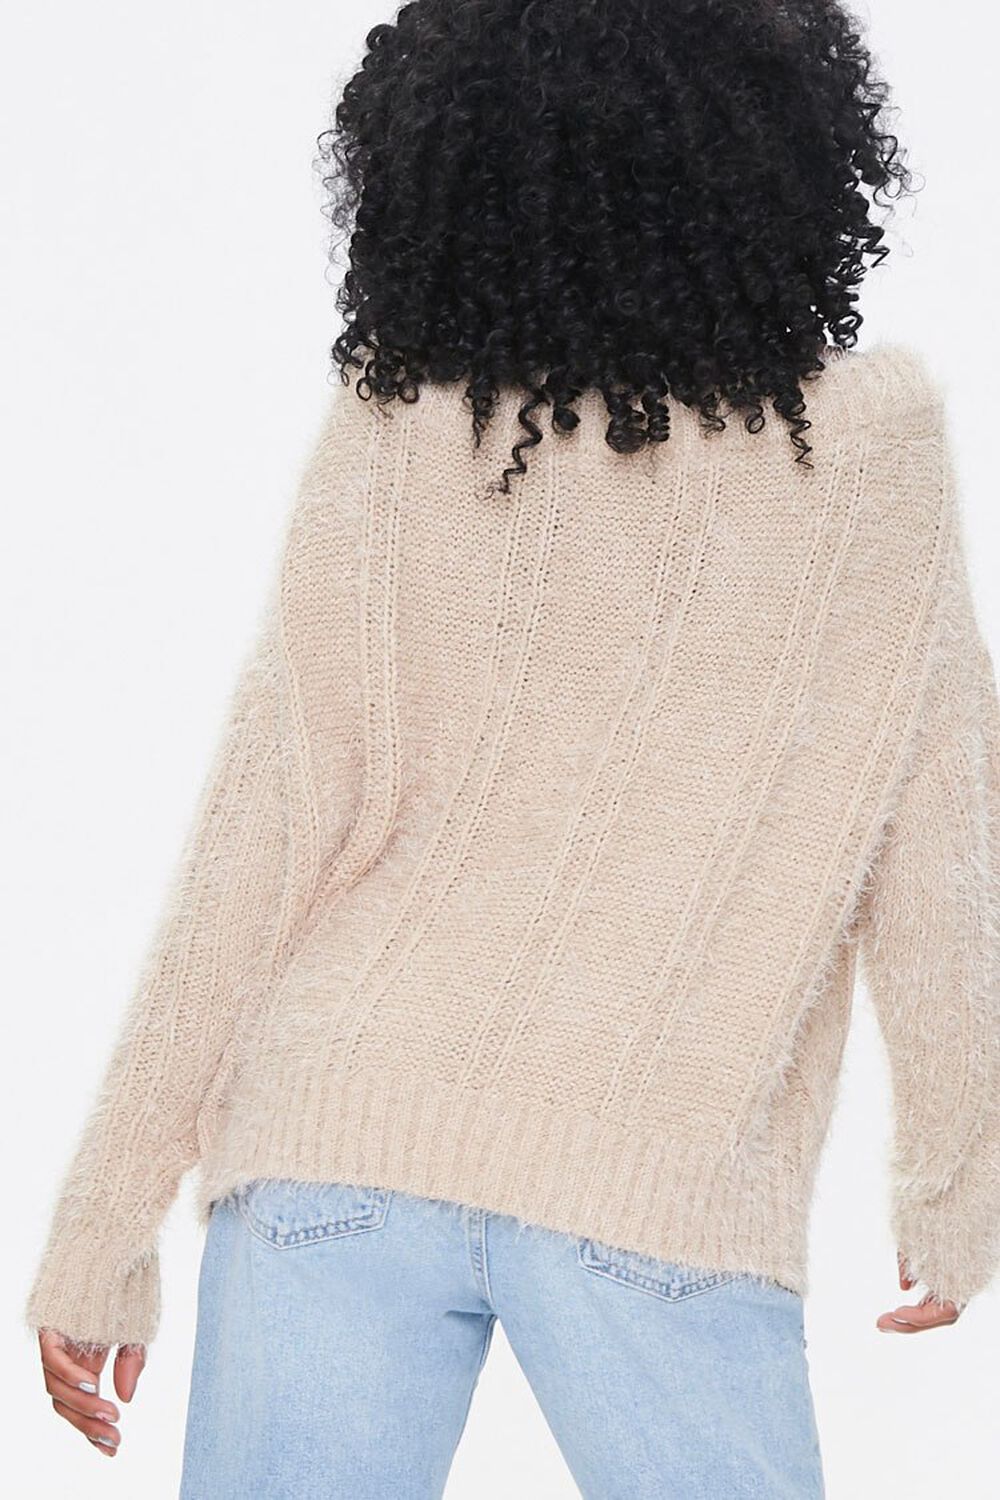 TAUPE Fuzzy Boat Neck Sweater, image 3